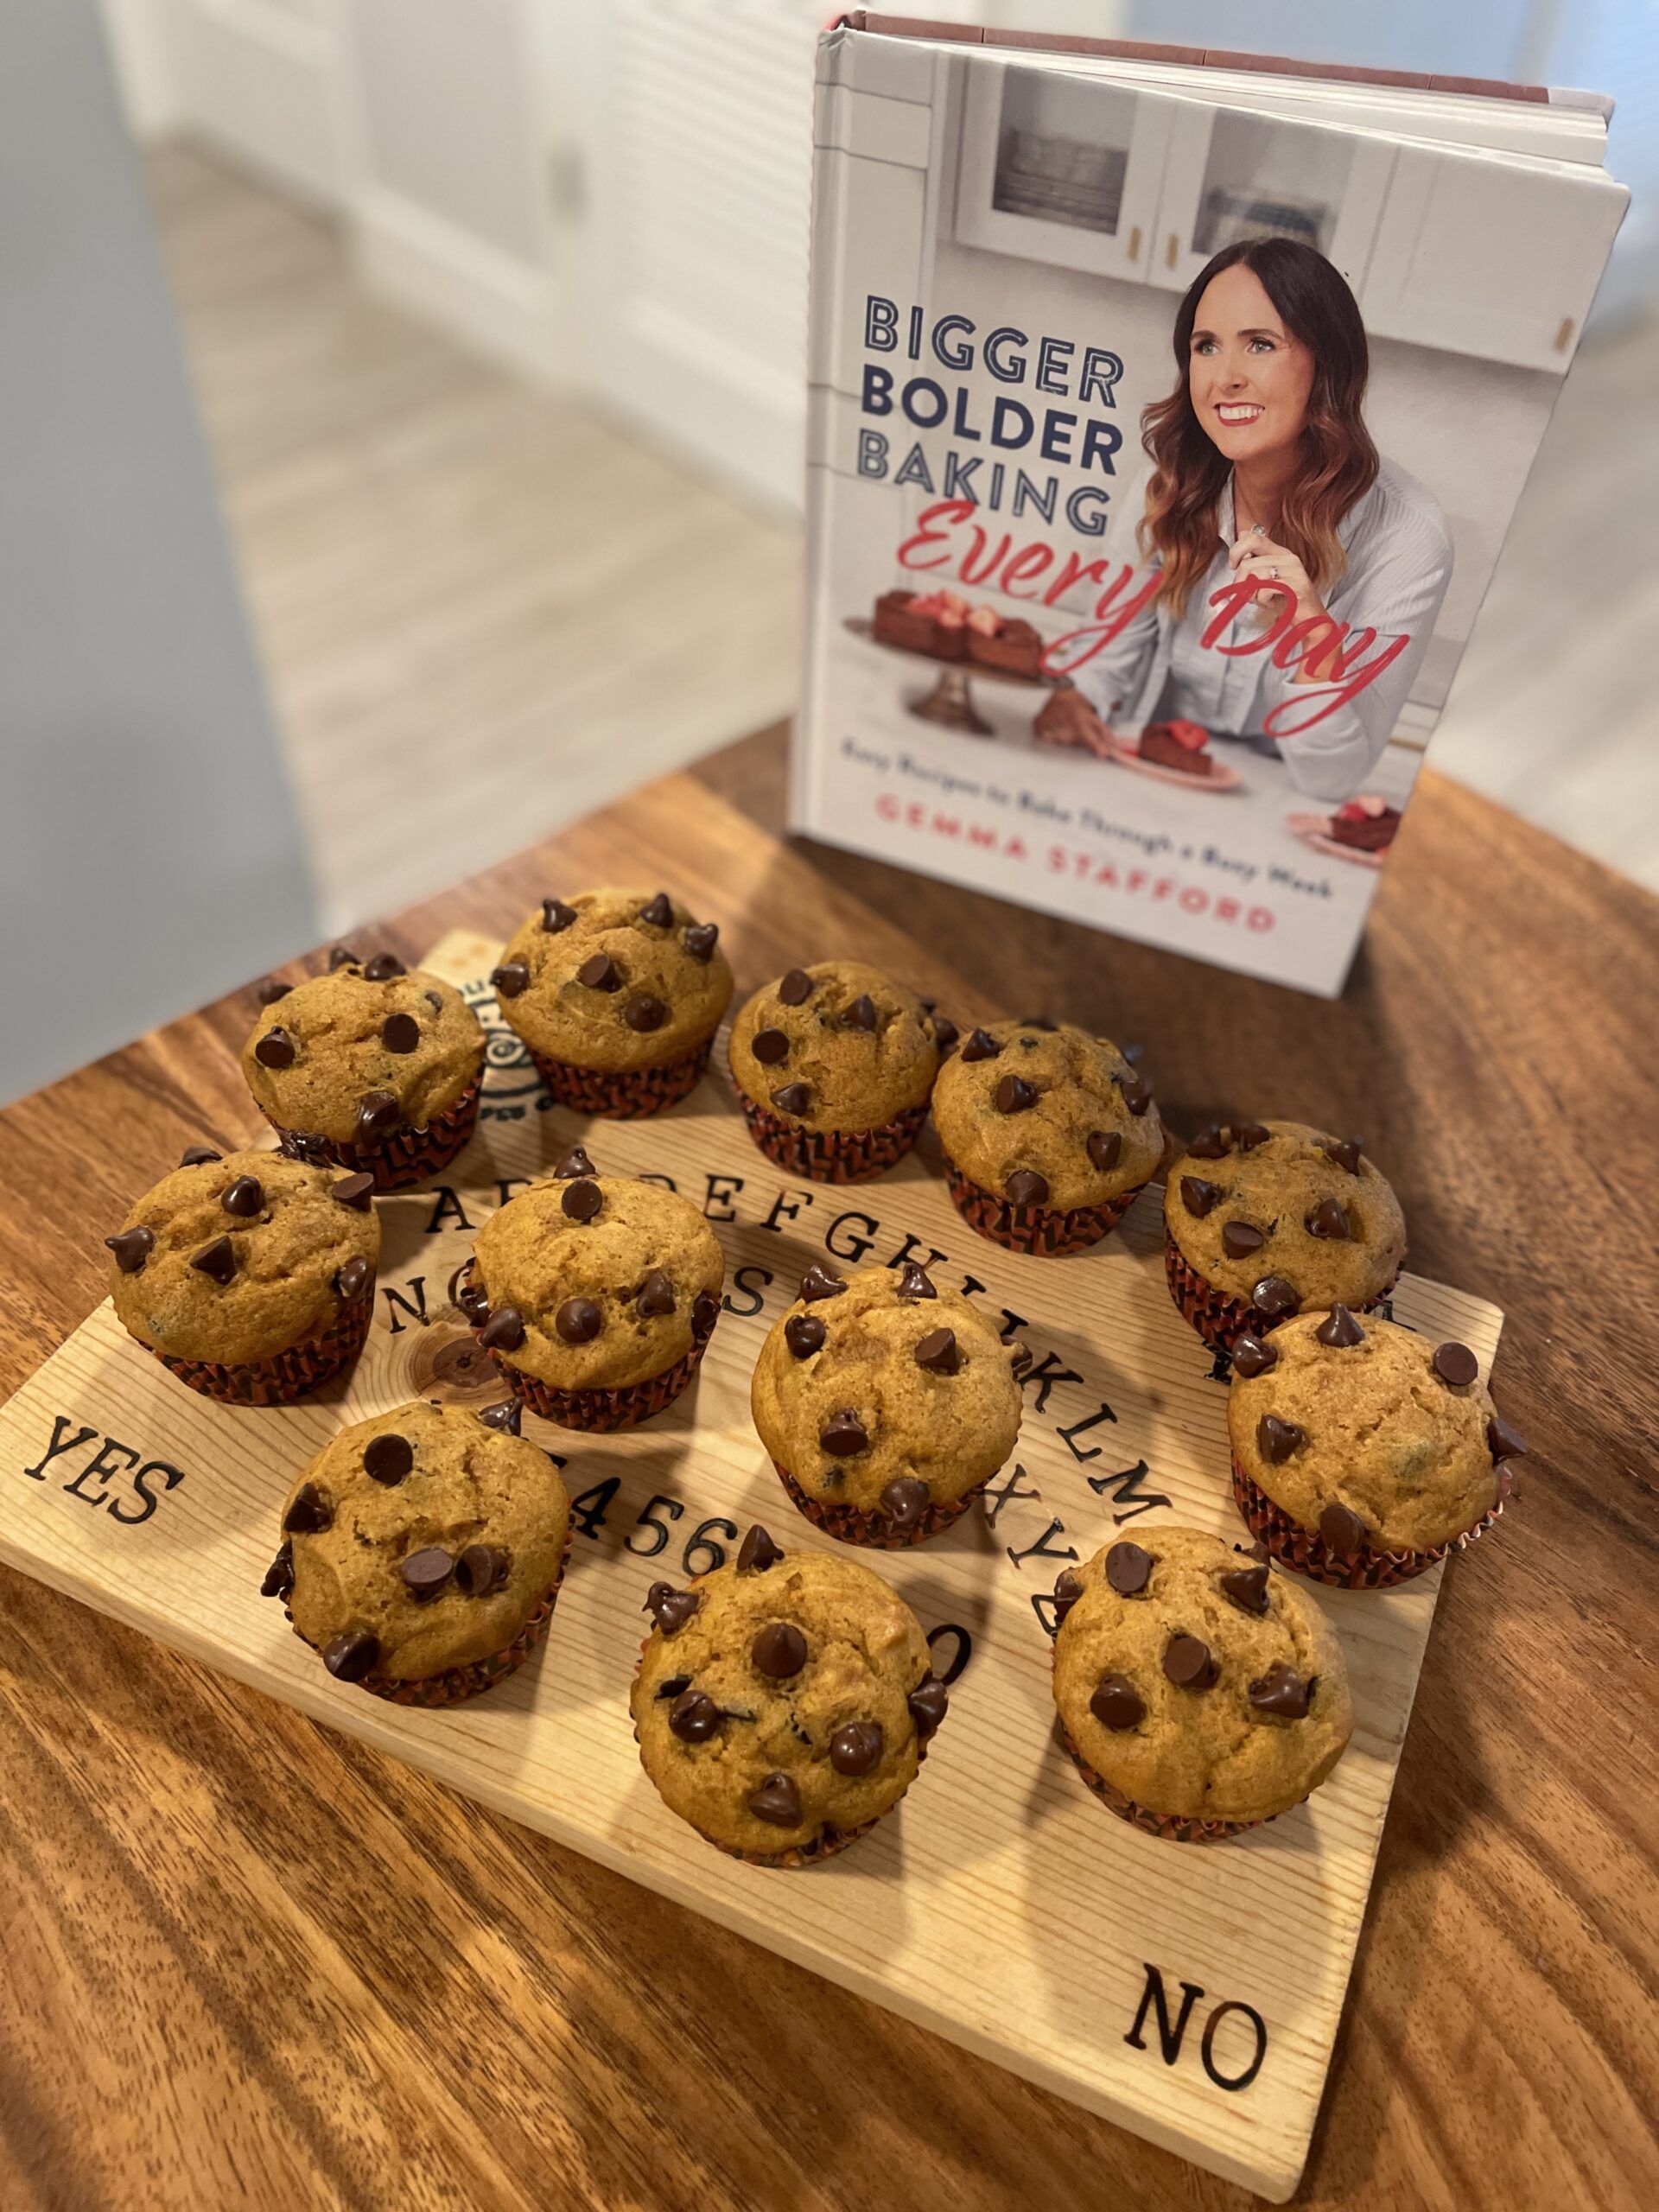 A dozen pumpkin muffins with chocolate chips on top displayed on a wooden cutting board that looks like a ouija board sitting on a wooden table by the cookbook Bigger Bolder Baking Every Day